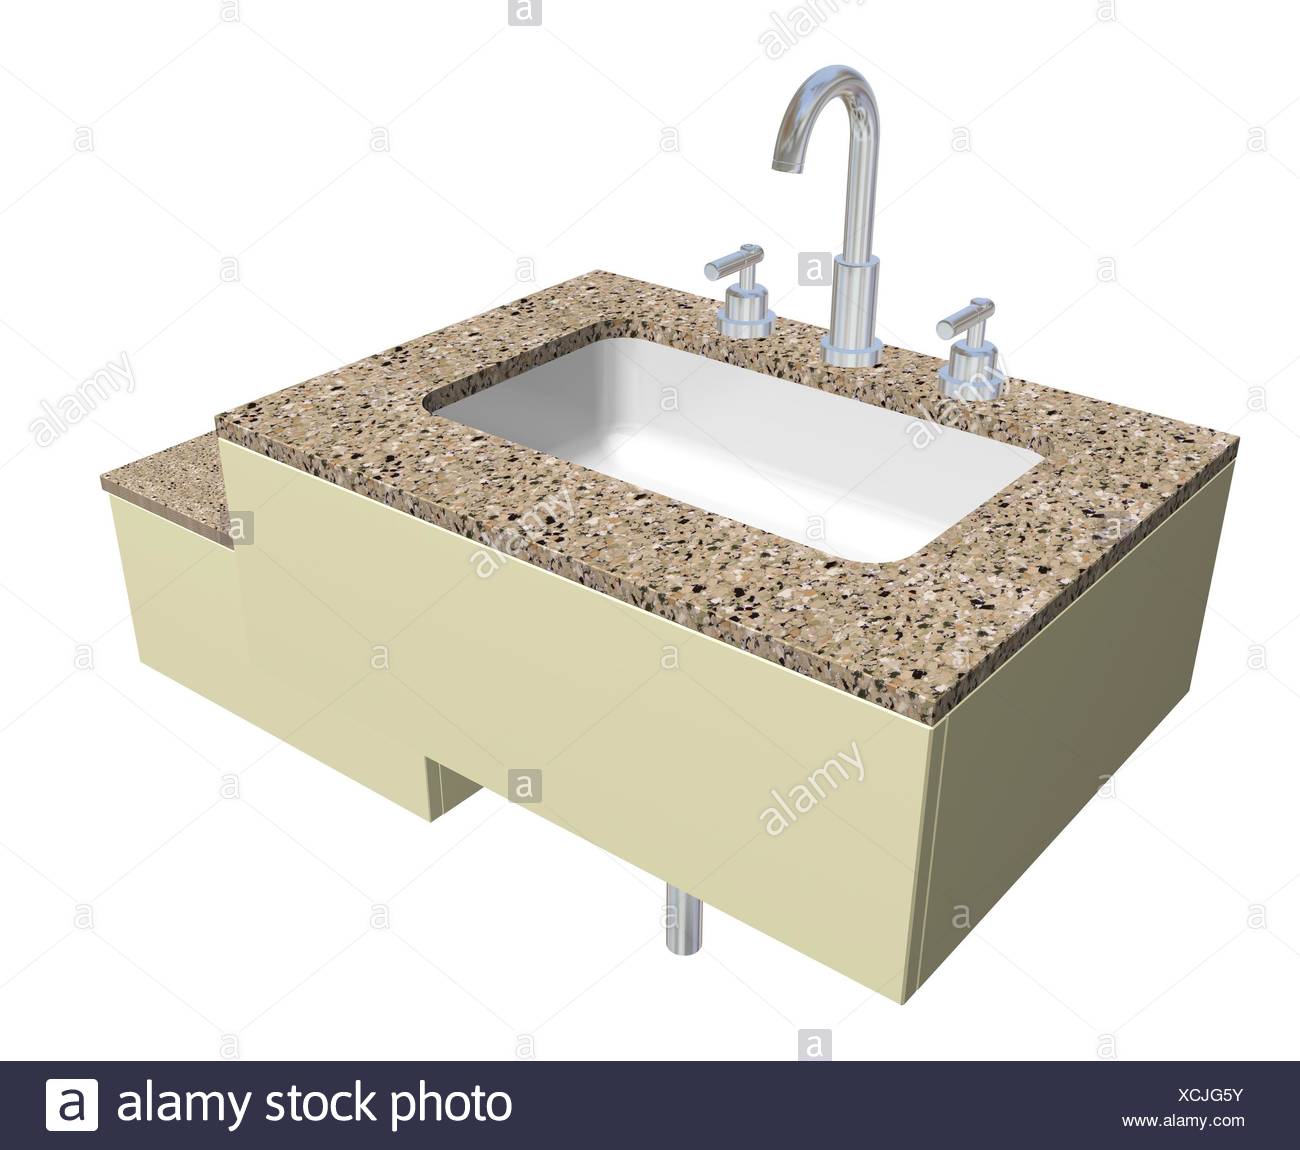 White Built In Square Bathroom Sink With Chrome Faucet And